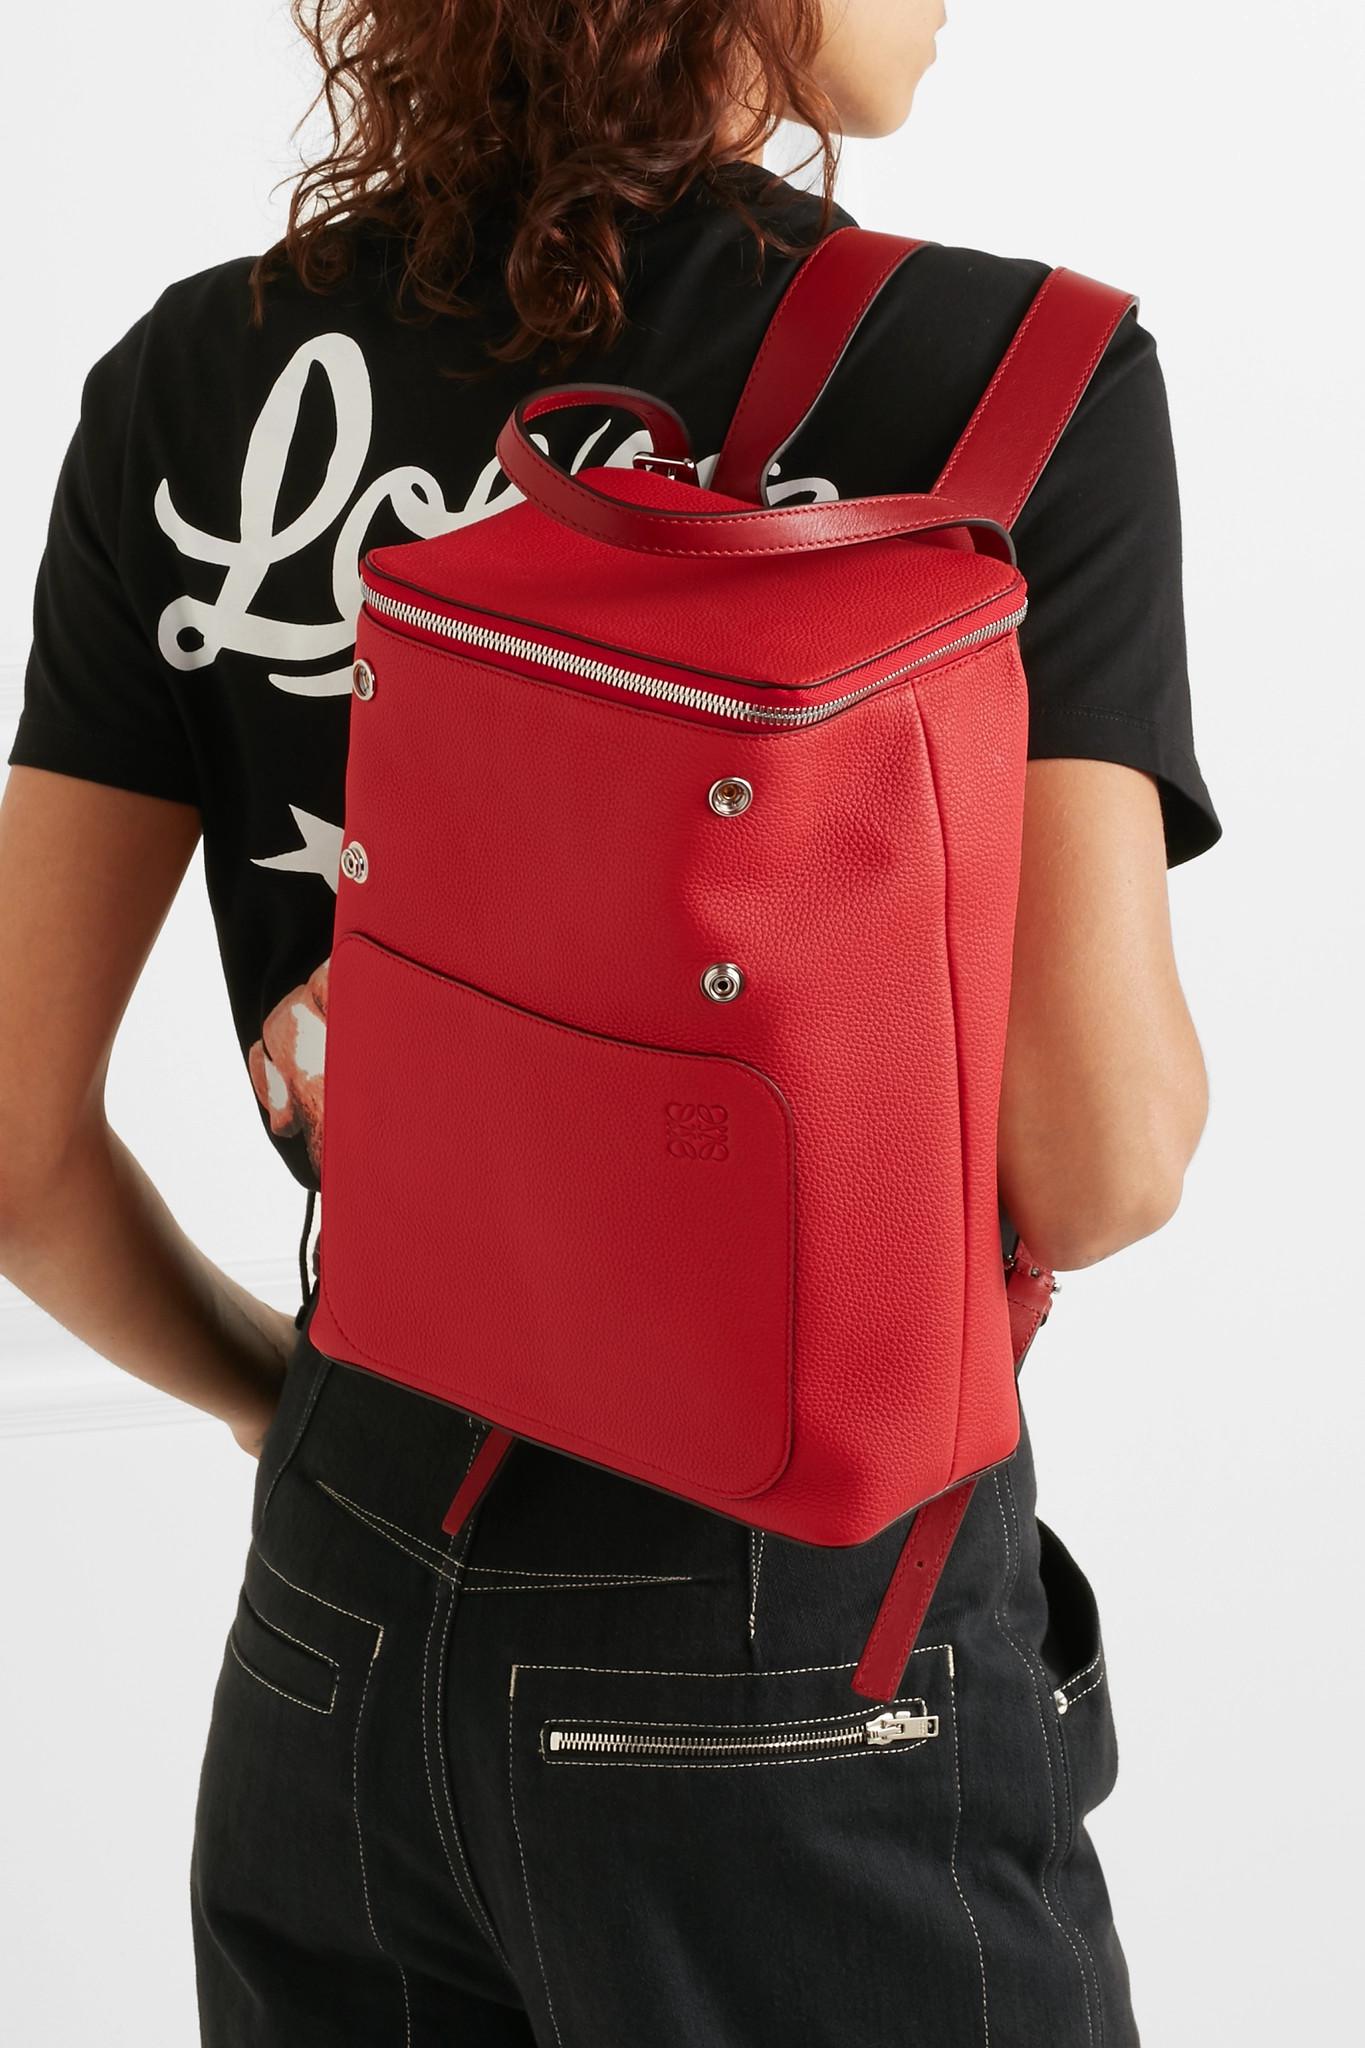 Loewe Goya Small Textured-leather Backpack Red One Size